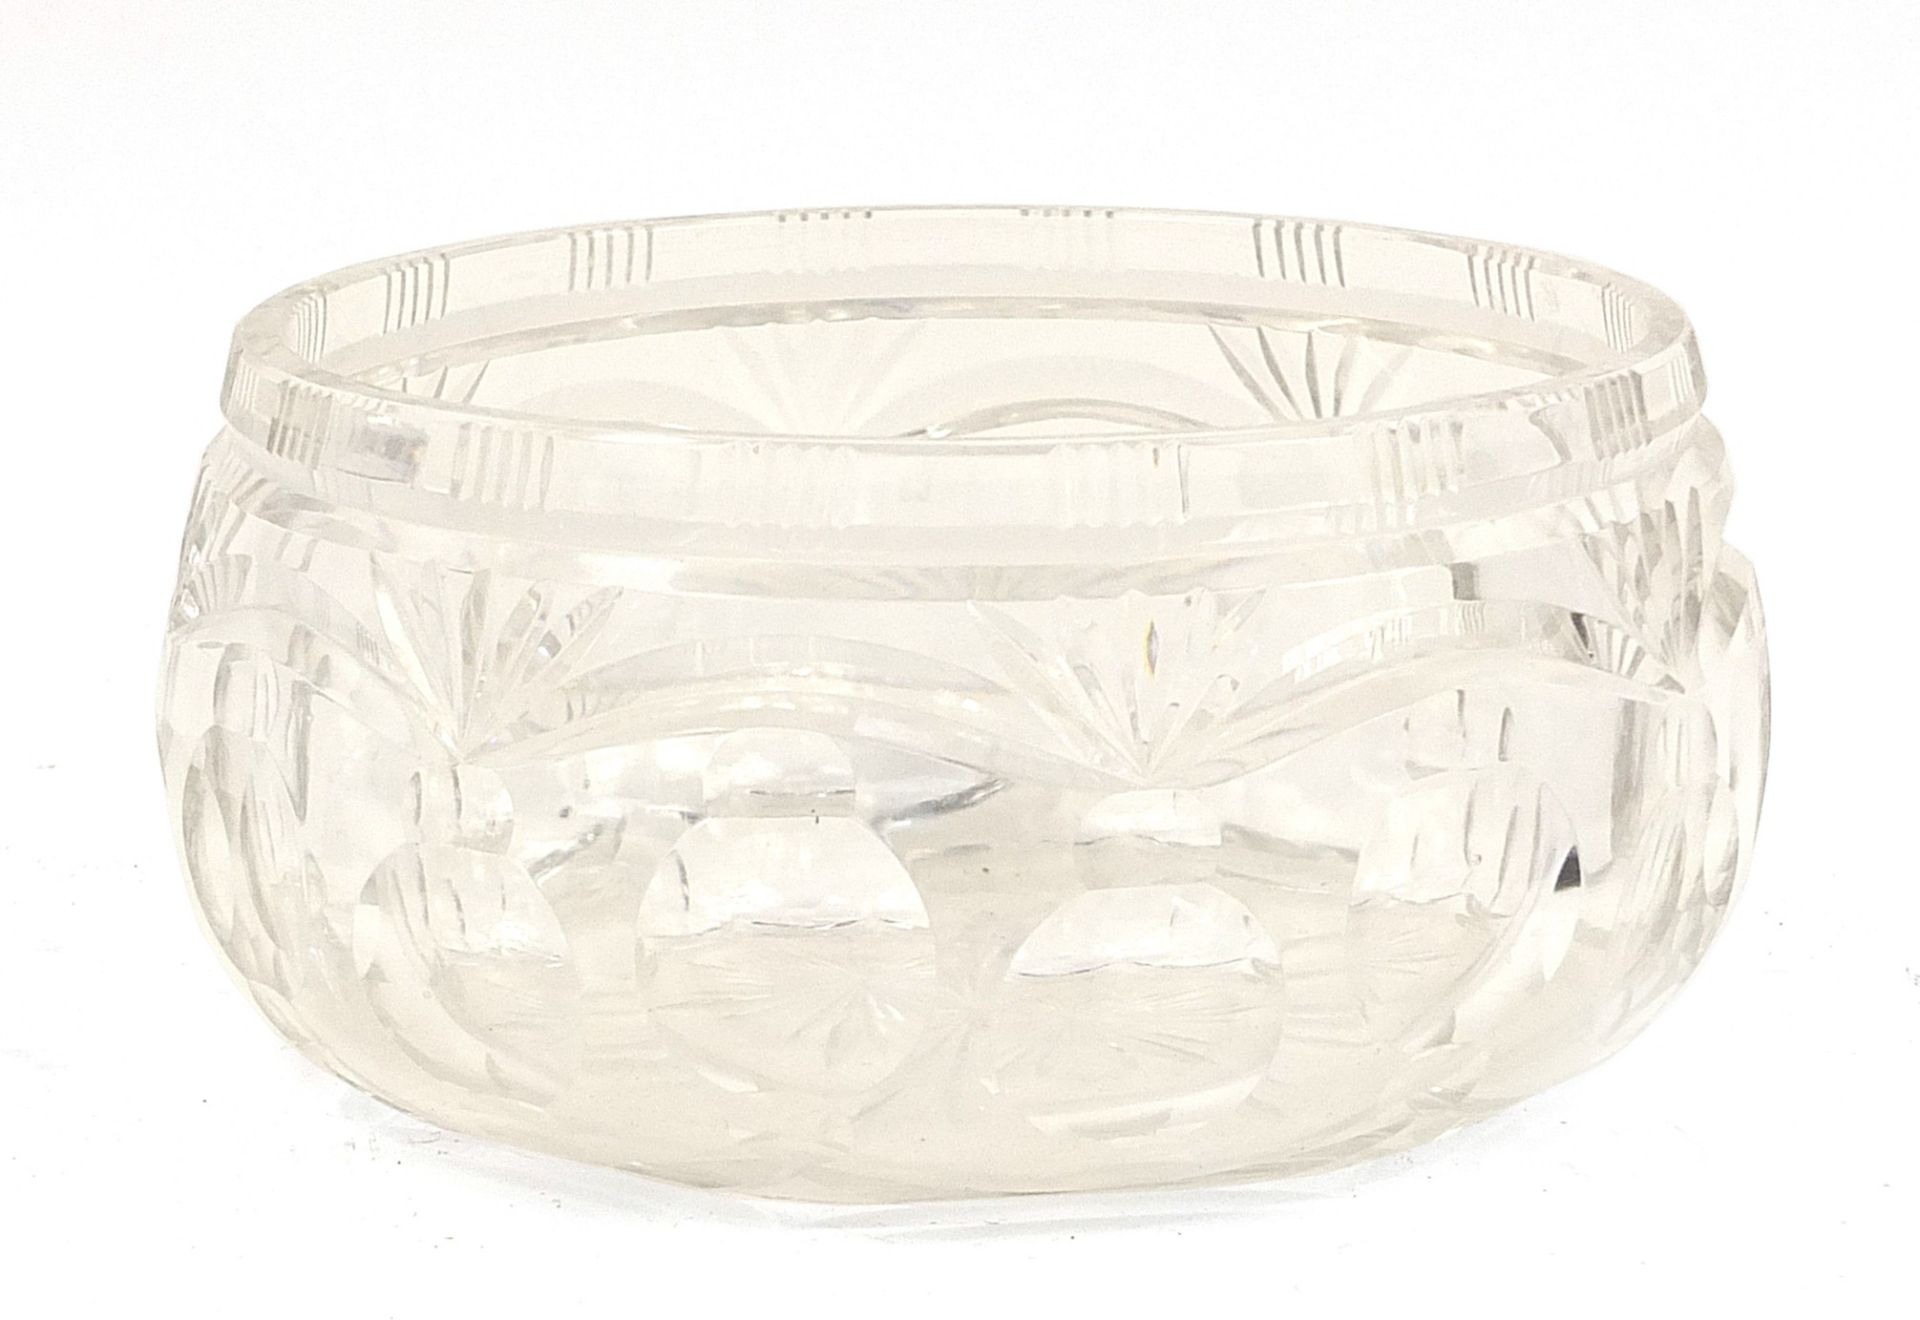 Walsh cut glass fruit bowl with star based decoration and thumbnail sides, 20cm in diameter - Image 2 of 3